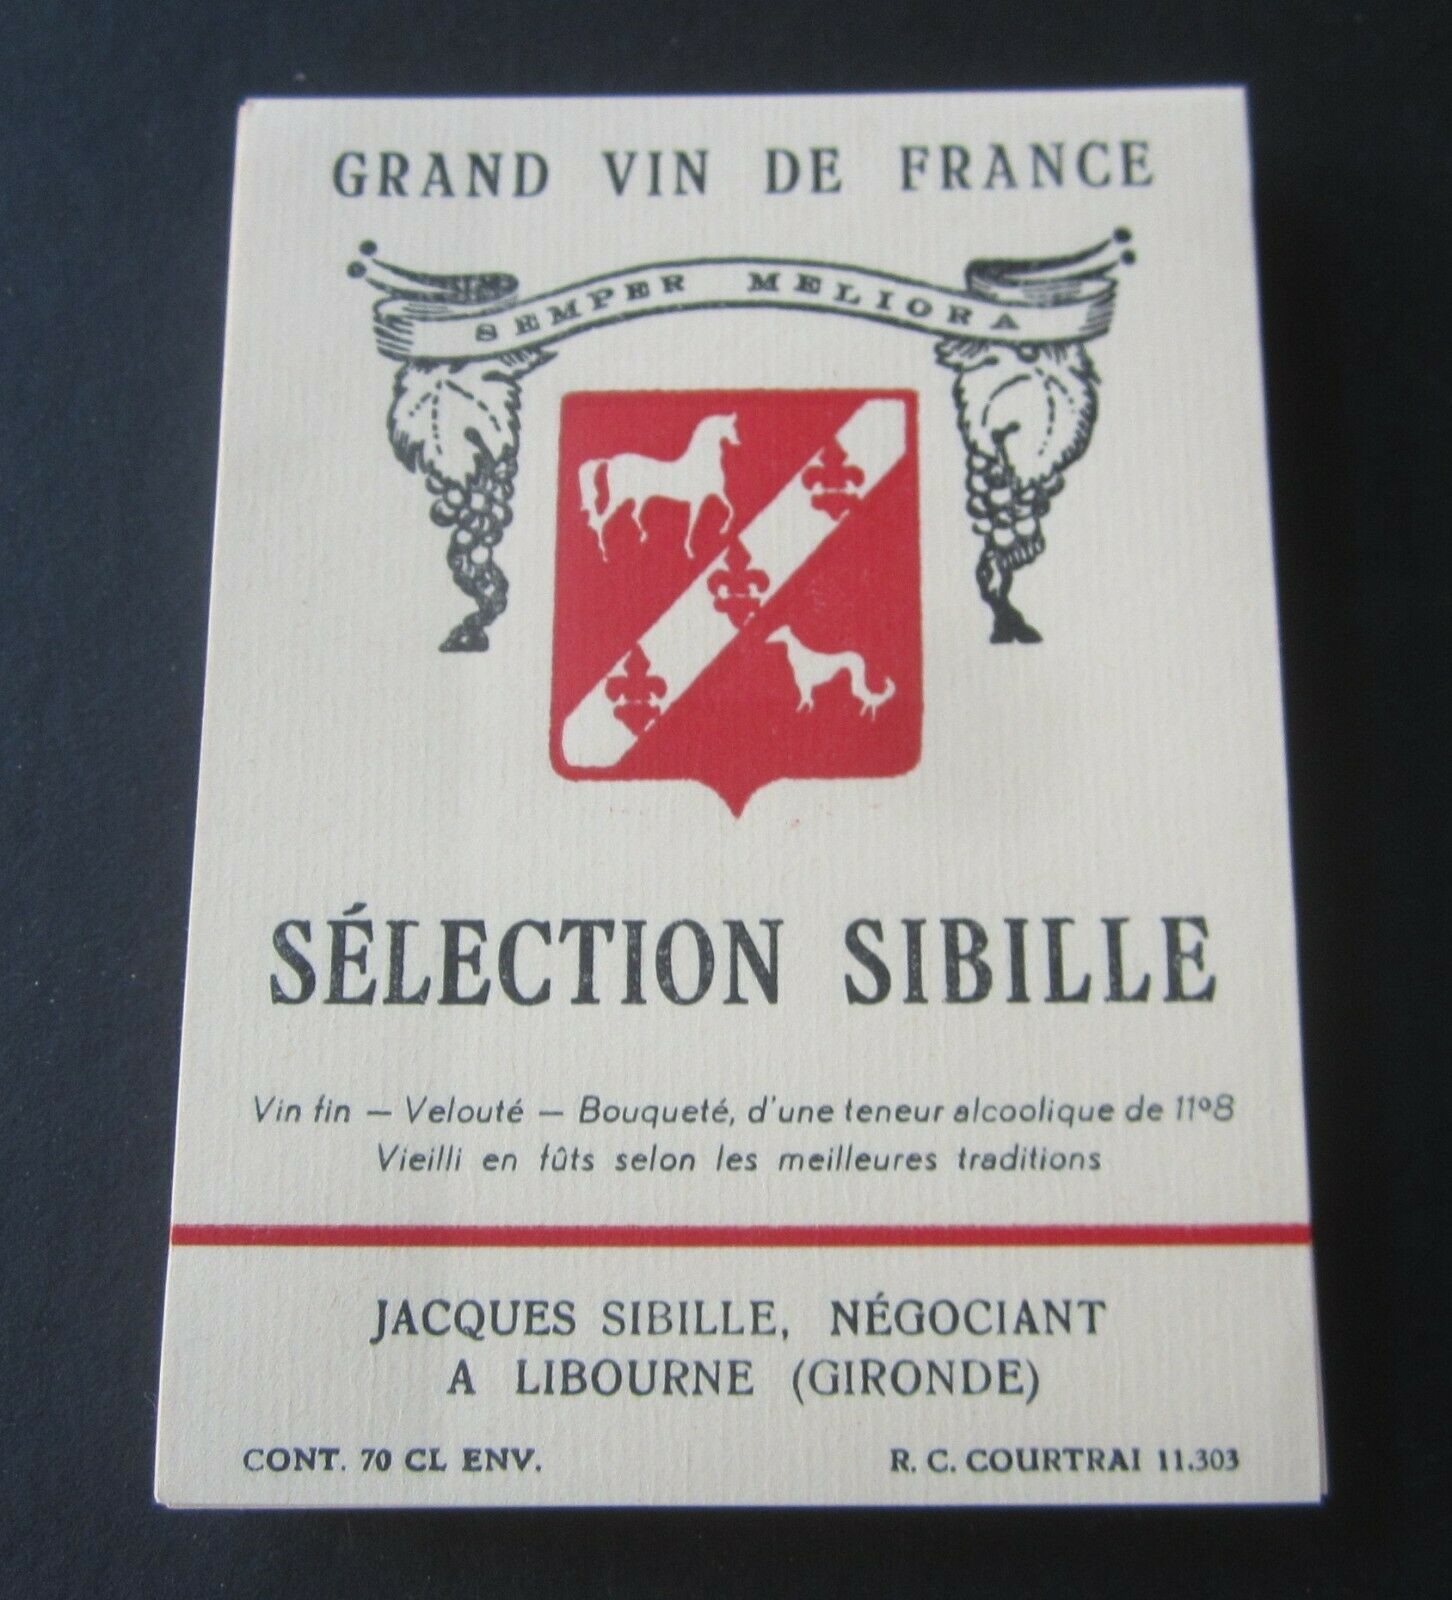  Lot of 100 Old Vintage - SELECTION SIBILLE - F...